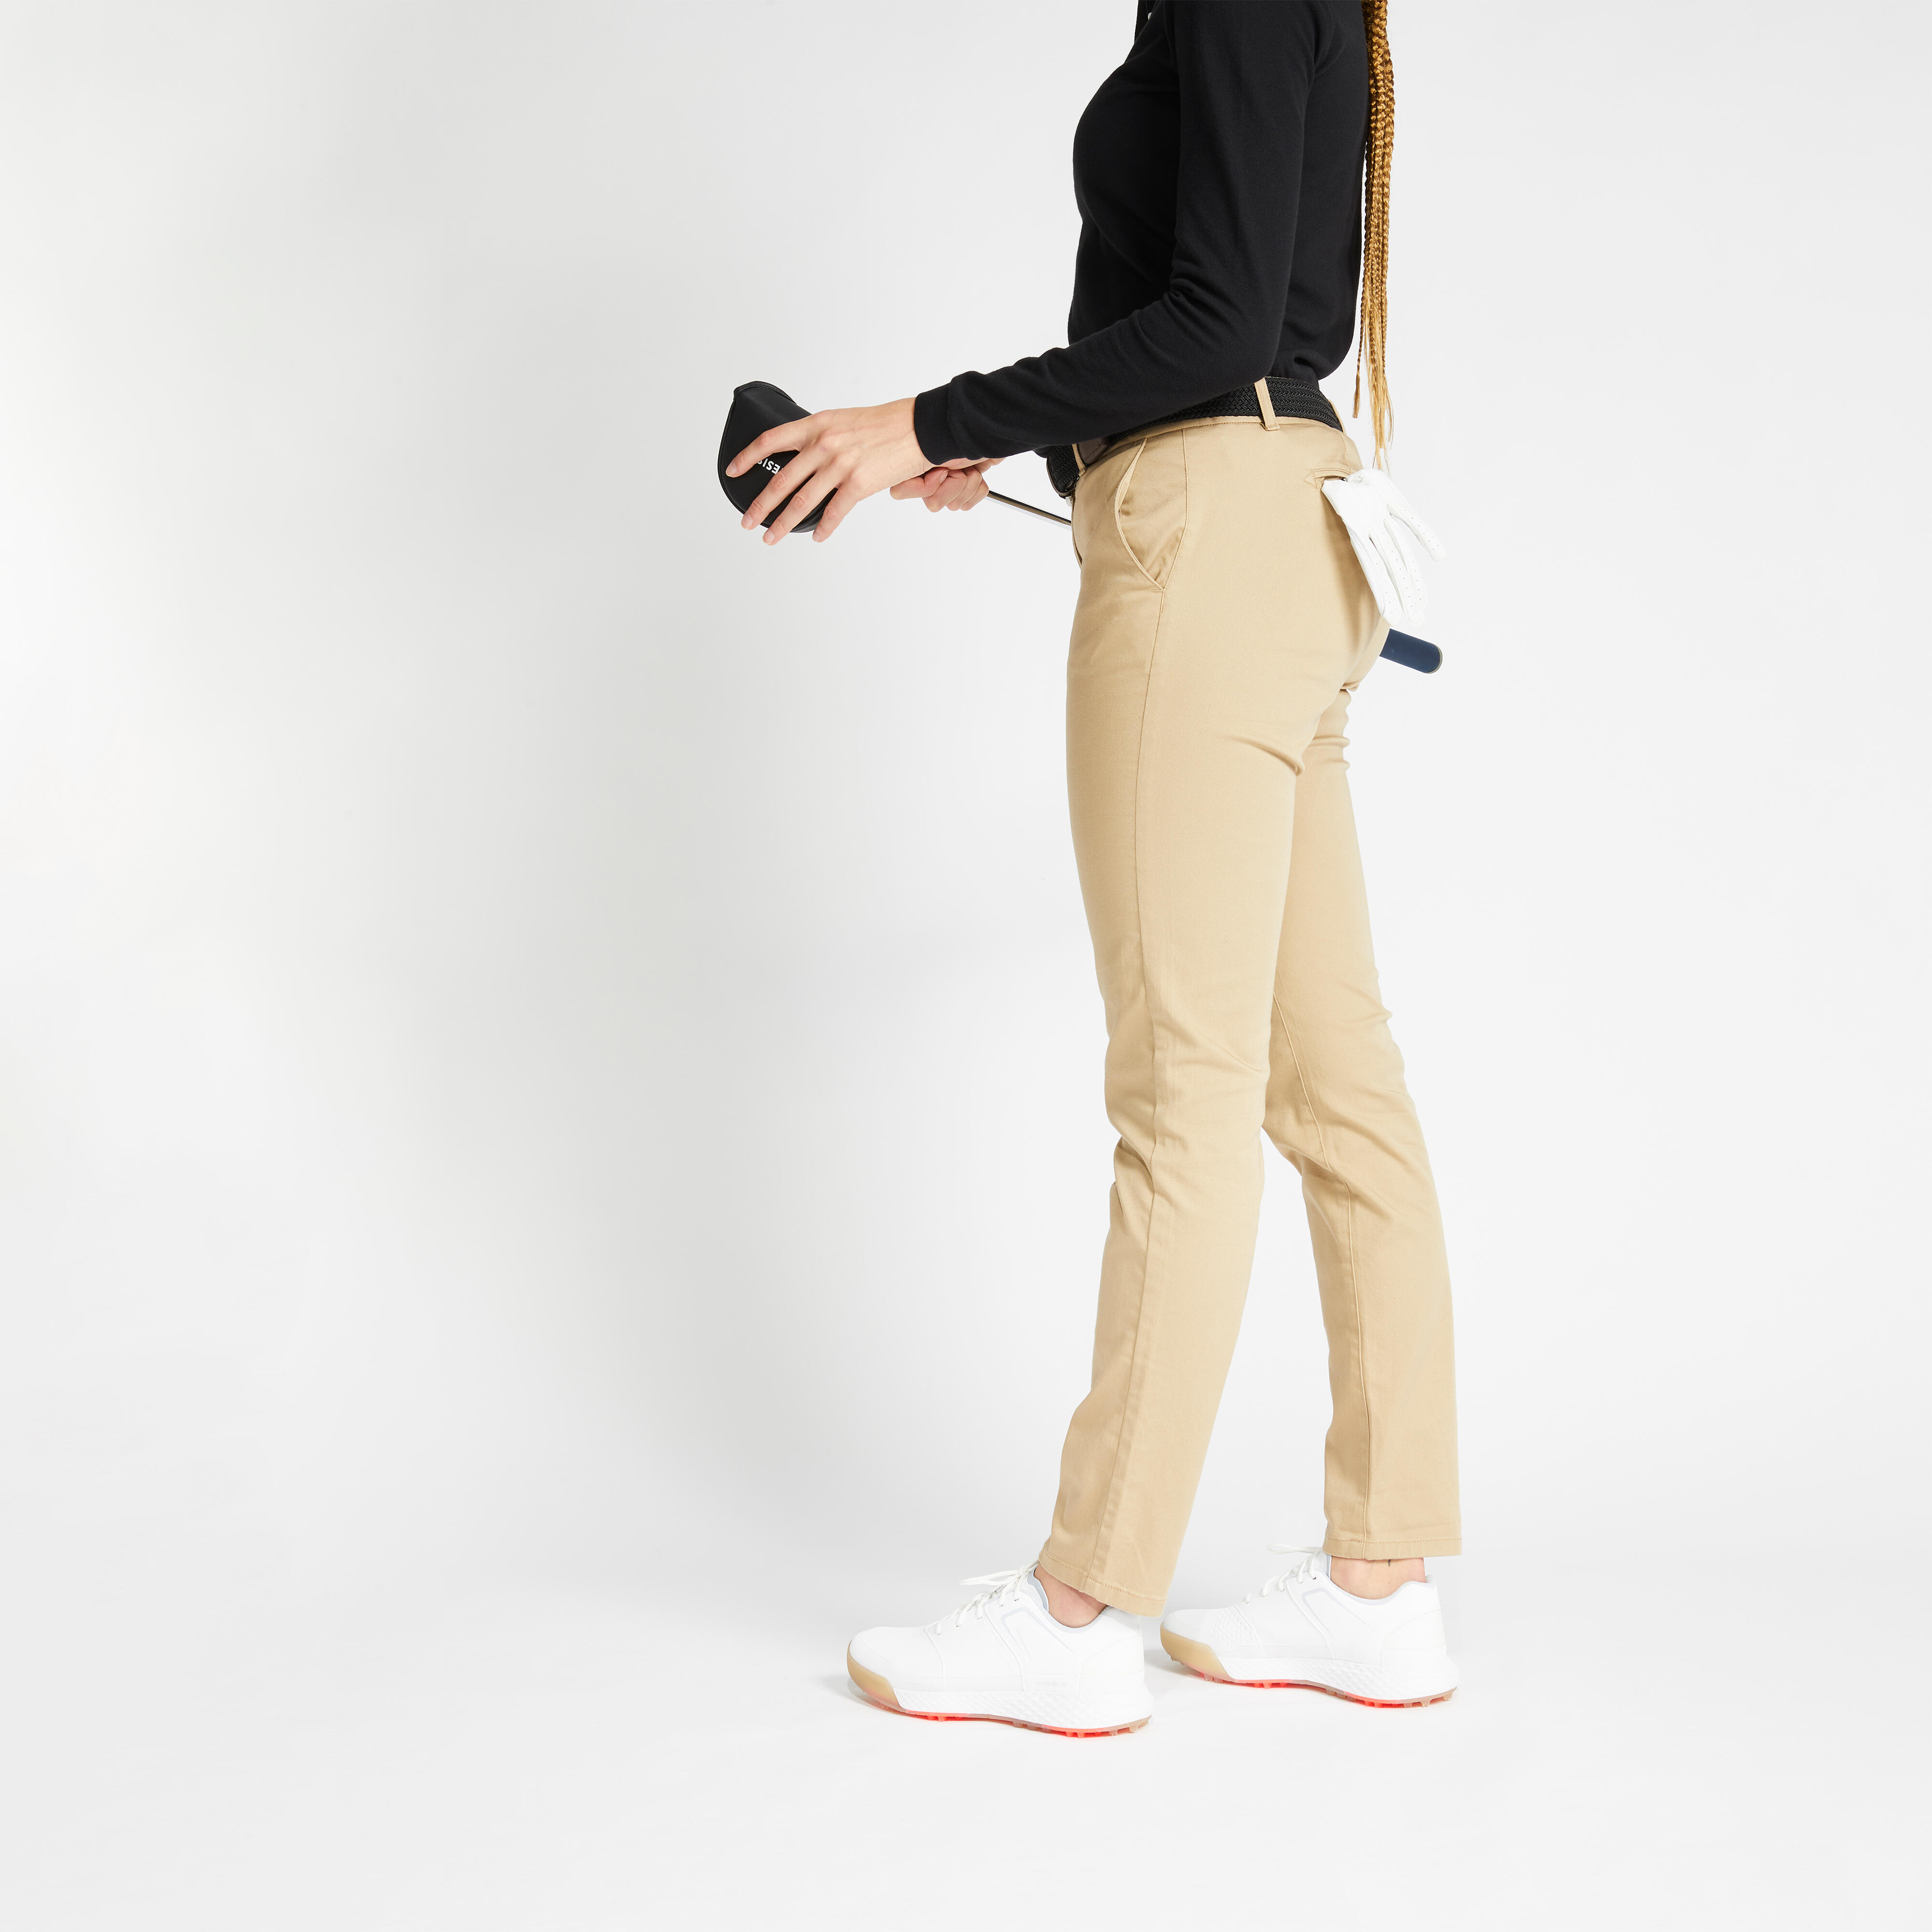 Top more than 70 uniqlo golf trousers  incoedocomvn